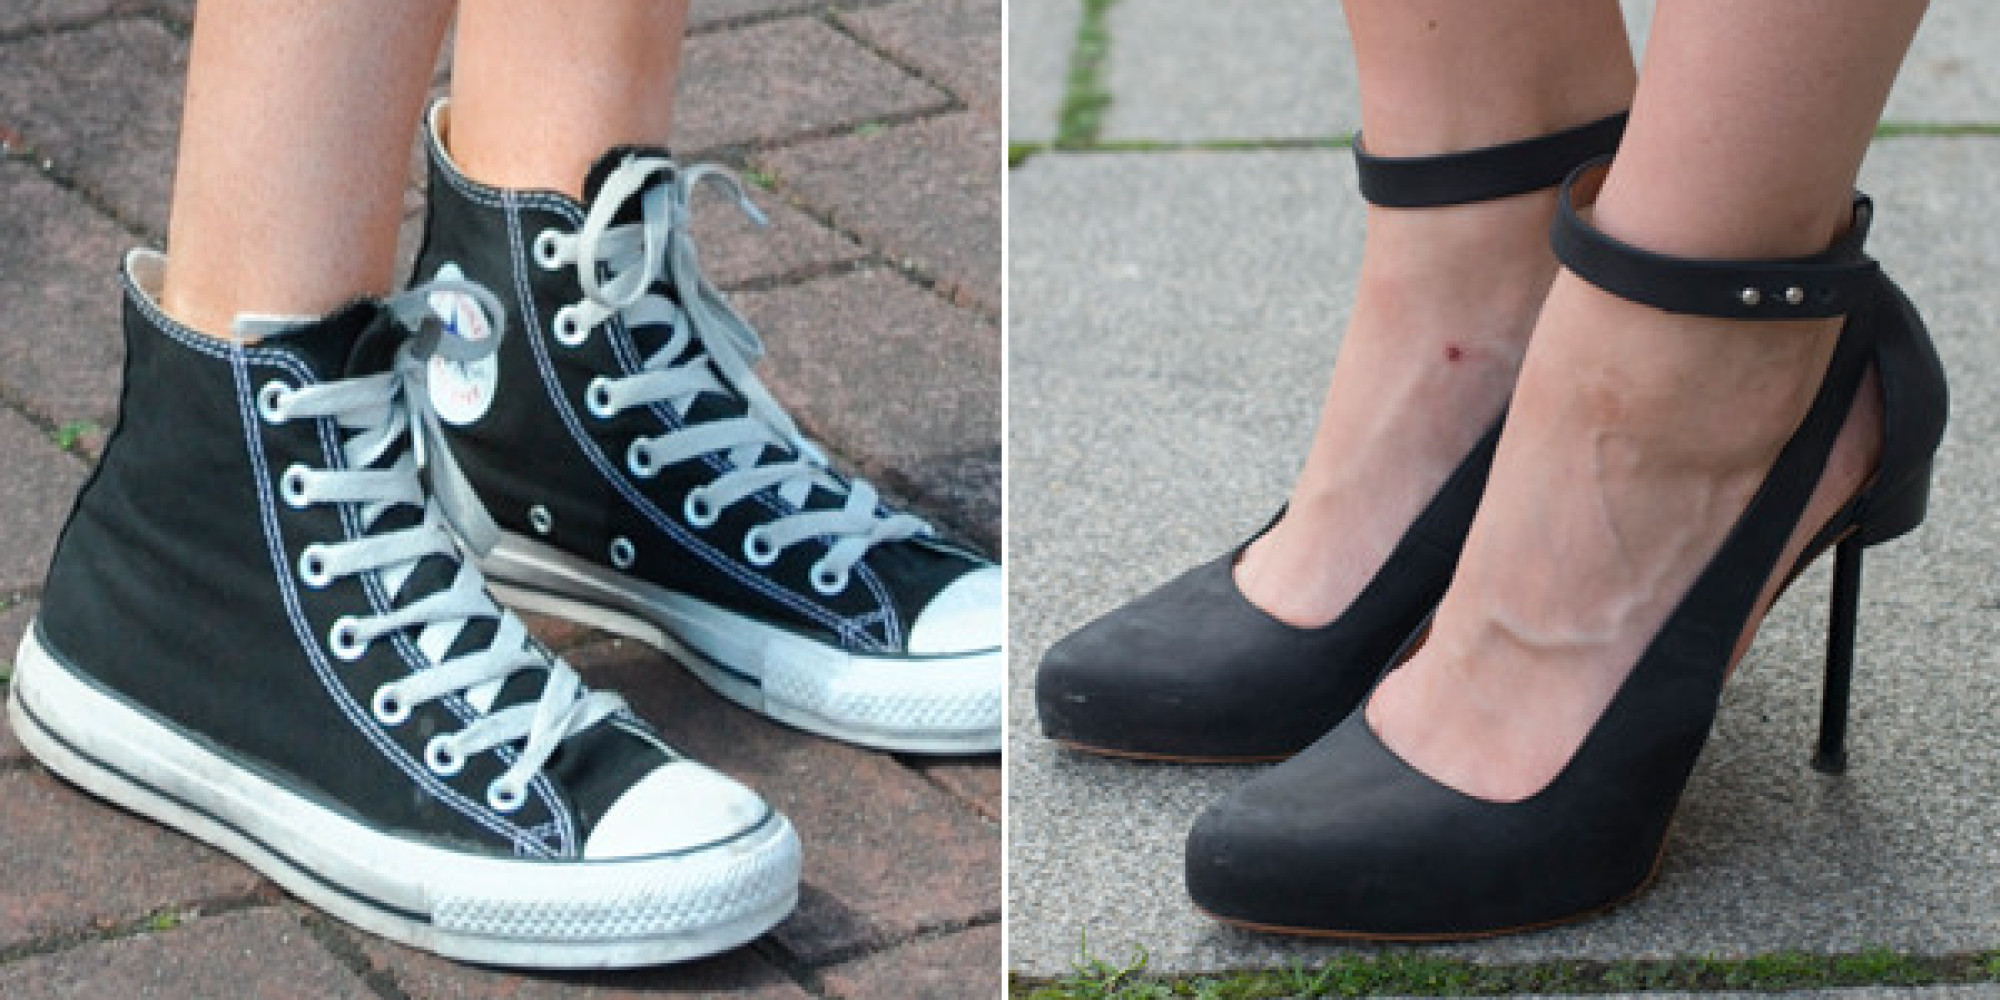 Which Shoes Are The Worst For Your Feet? (INFOGRAPHIC) | HuffPost